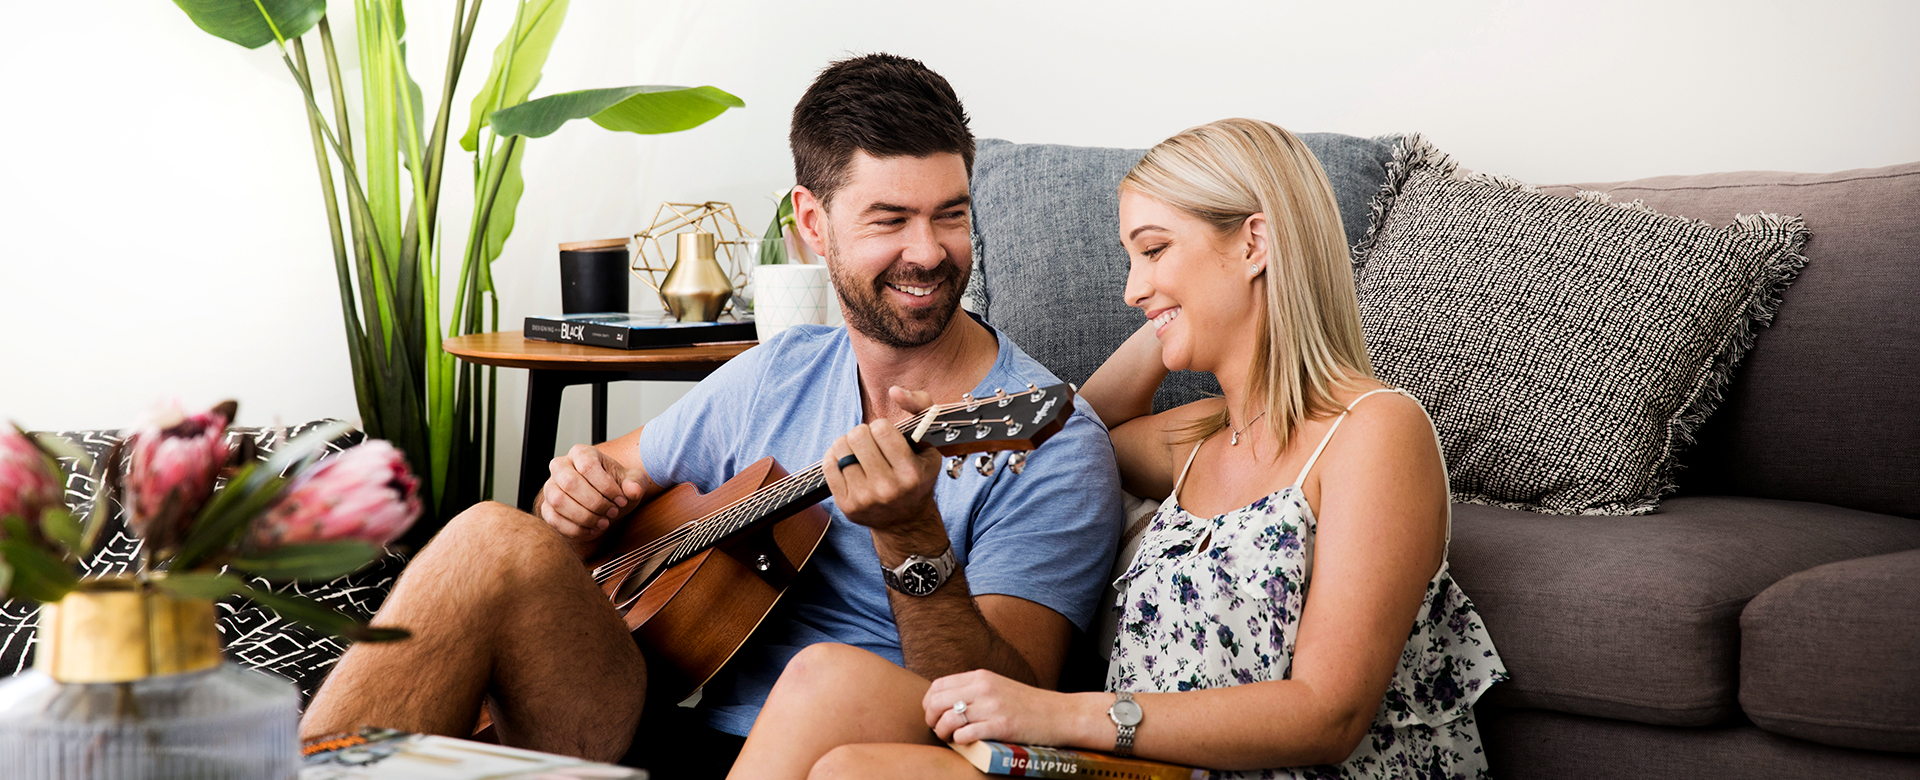 Couple playing guitar sitting in living room of their Evergreen home by AVJennings Family sitting on couch in their Evergreen home by AVJennings,  located in Spring Farm, NSW 2570. Houses for sale spring farm, house and land packages Spring Farm.